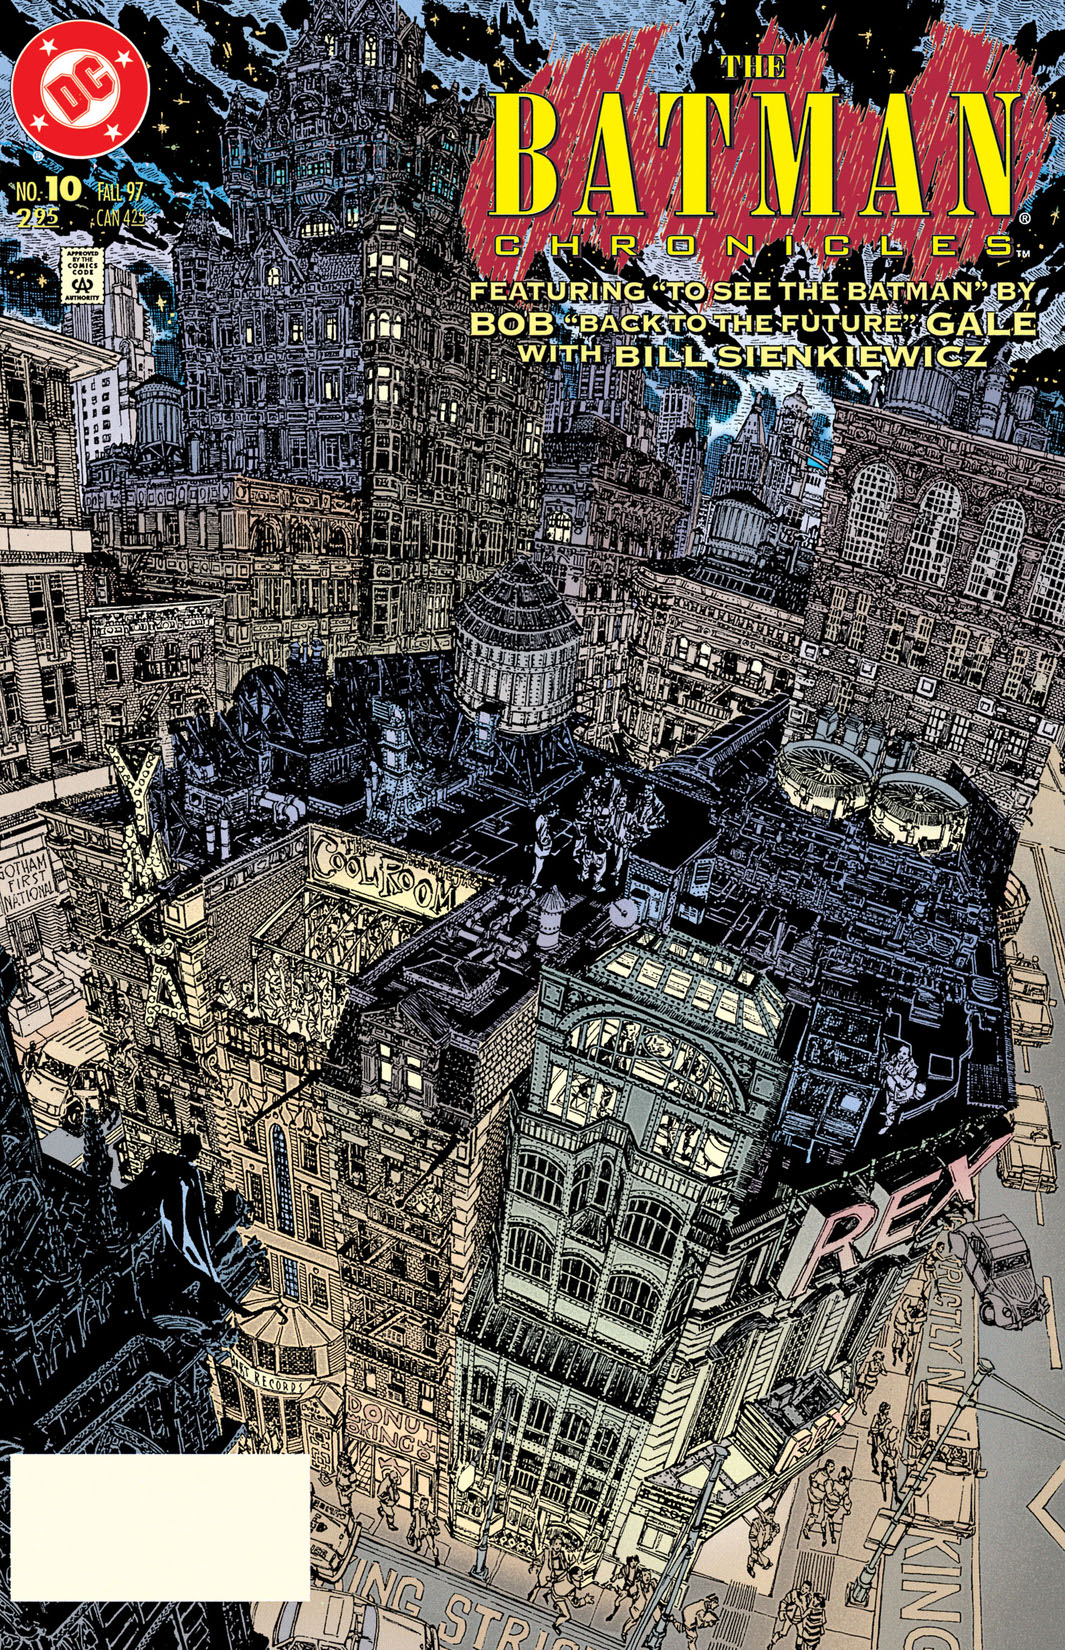 The Batman Chronicles #10 preview images